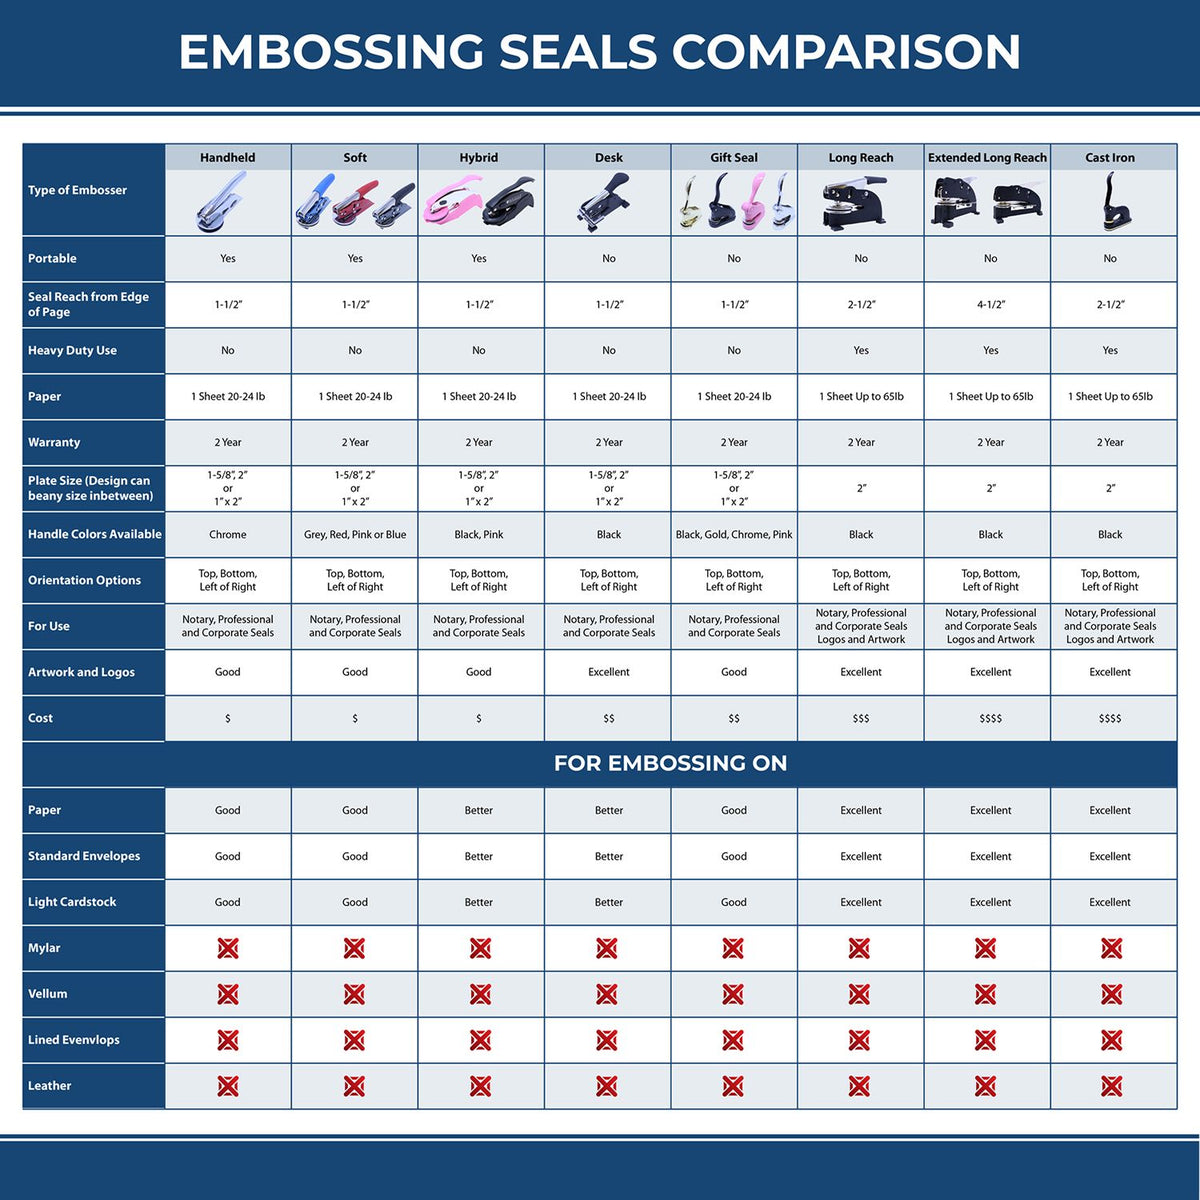 A comparison chart for the different types of mount models available for the Long Reach Missouri Geology Seal